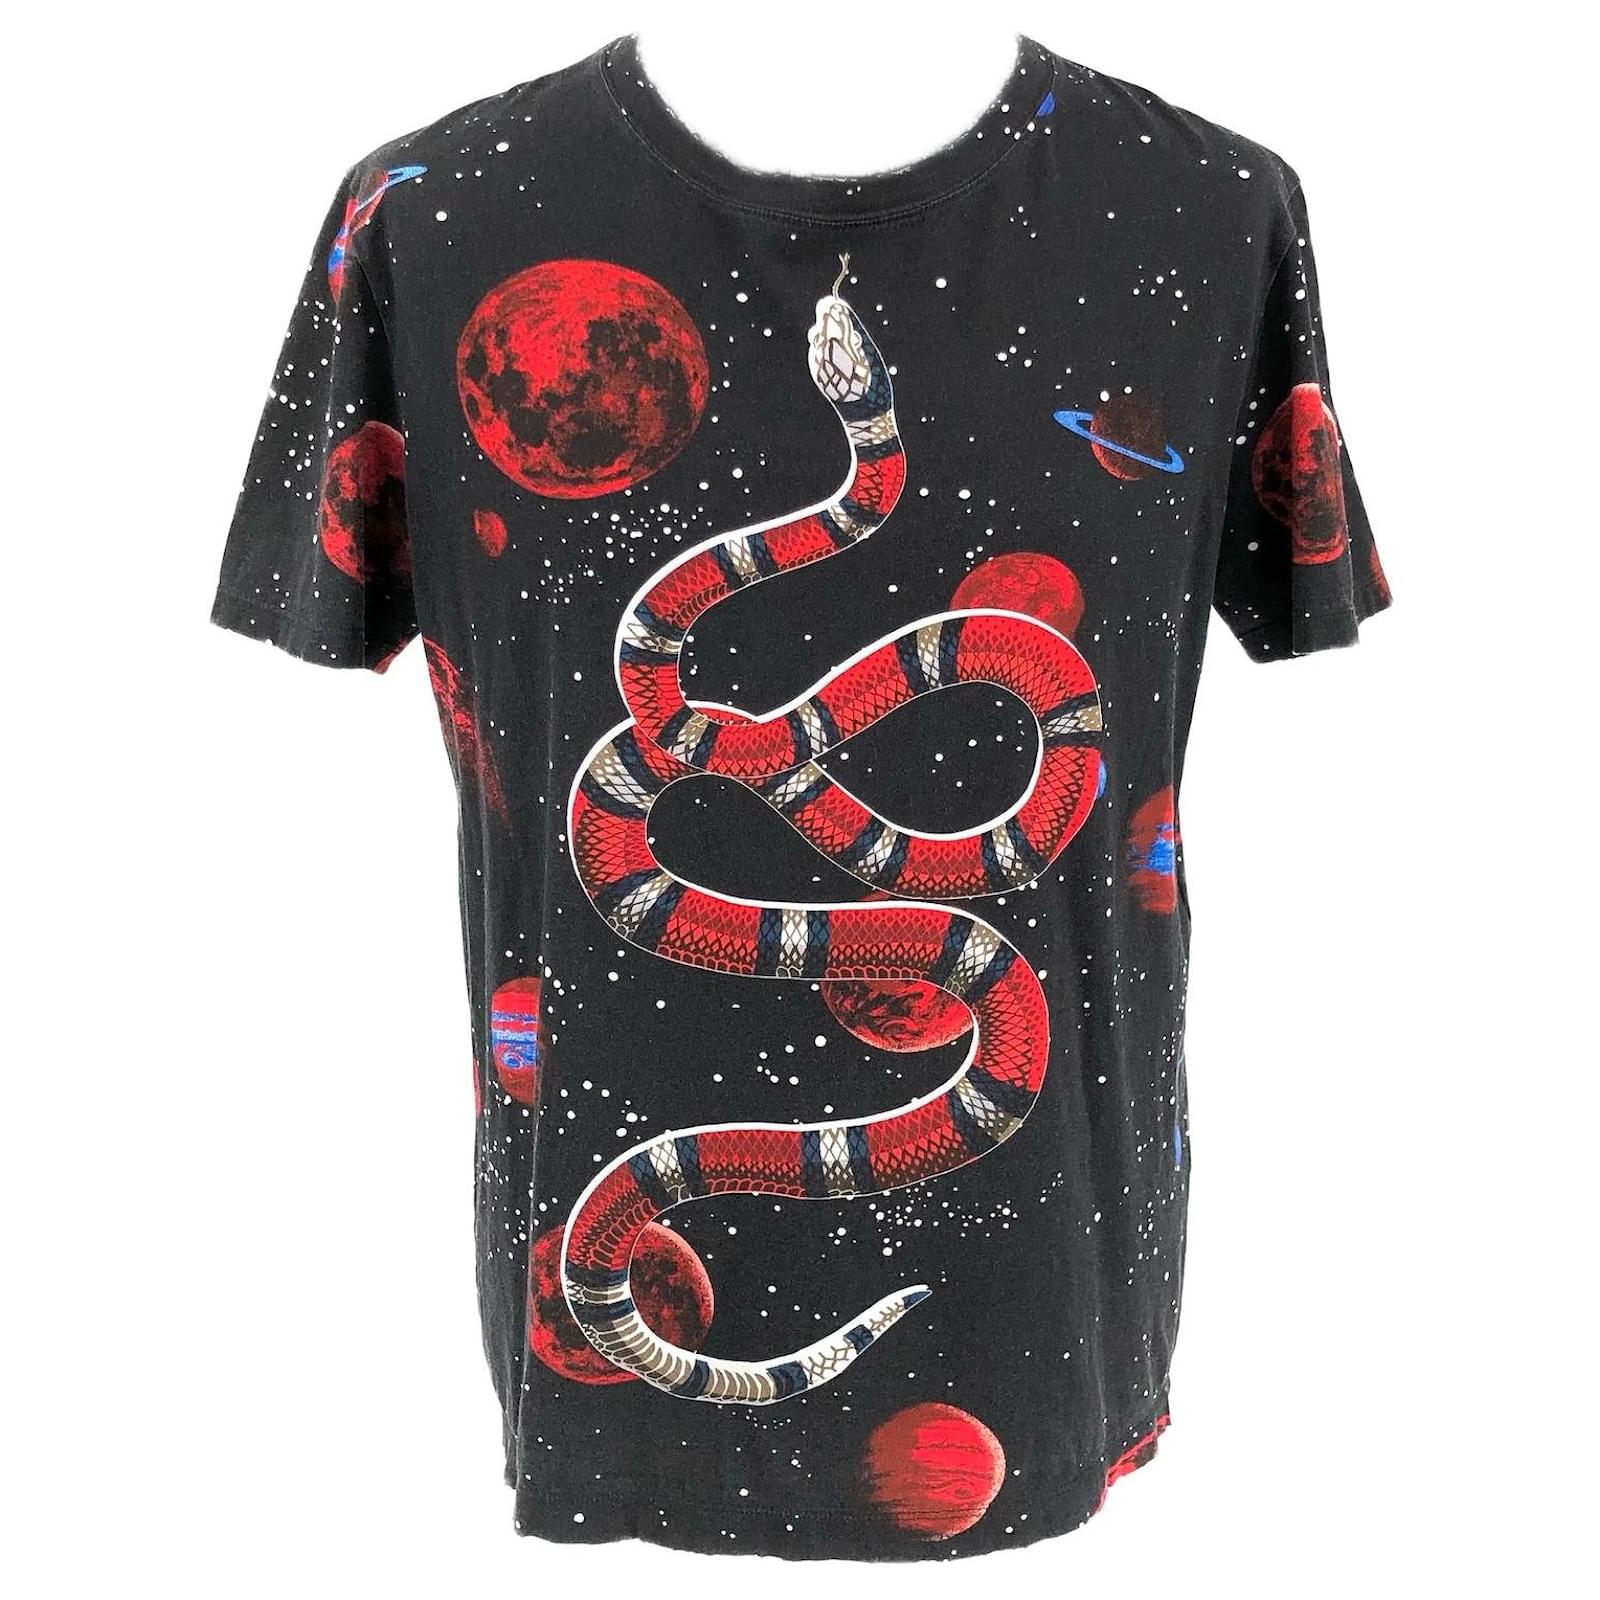 Gucci t-shirt black with space and snake design ref.530690 - Joli